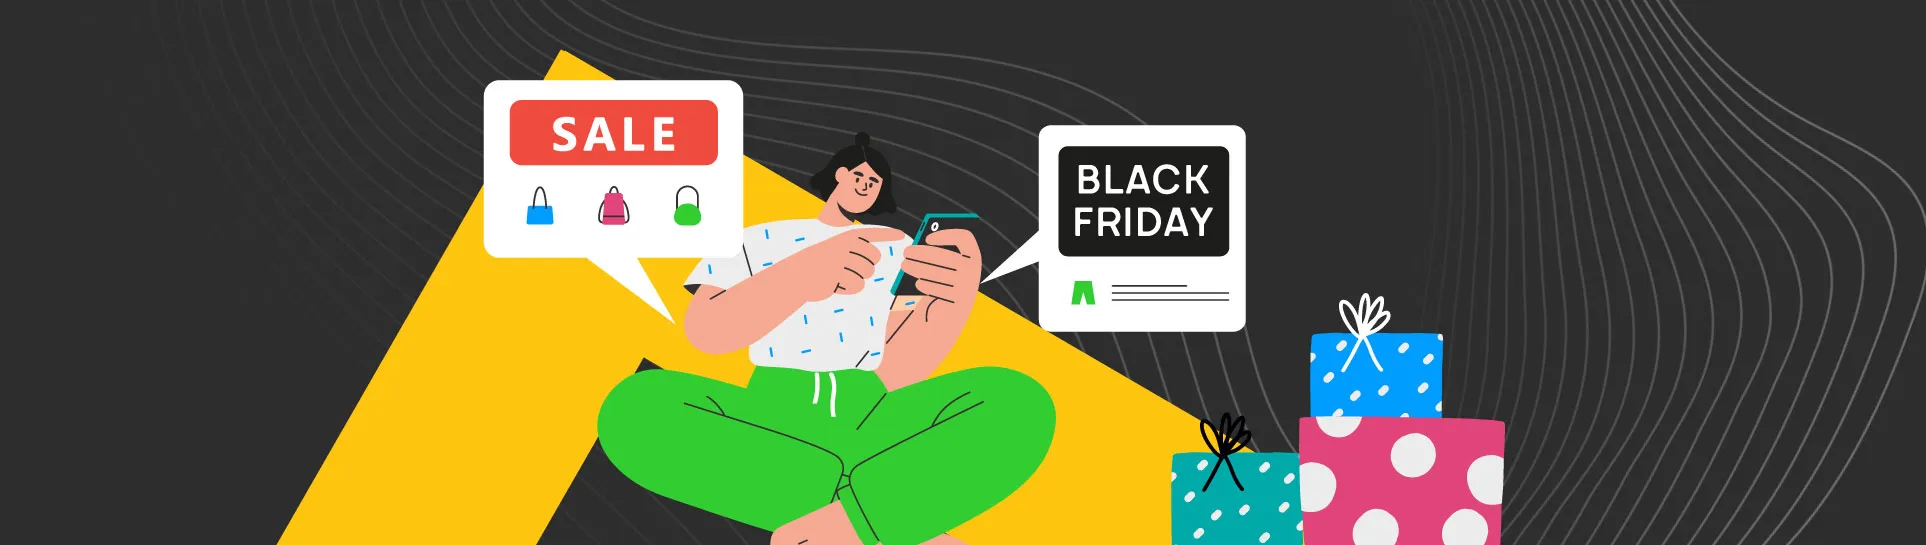 How to Prepare for Black Friday 2019 [Checklist]